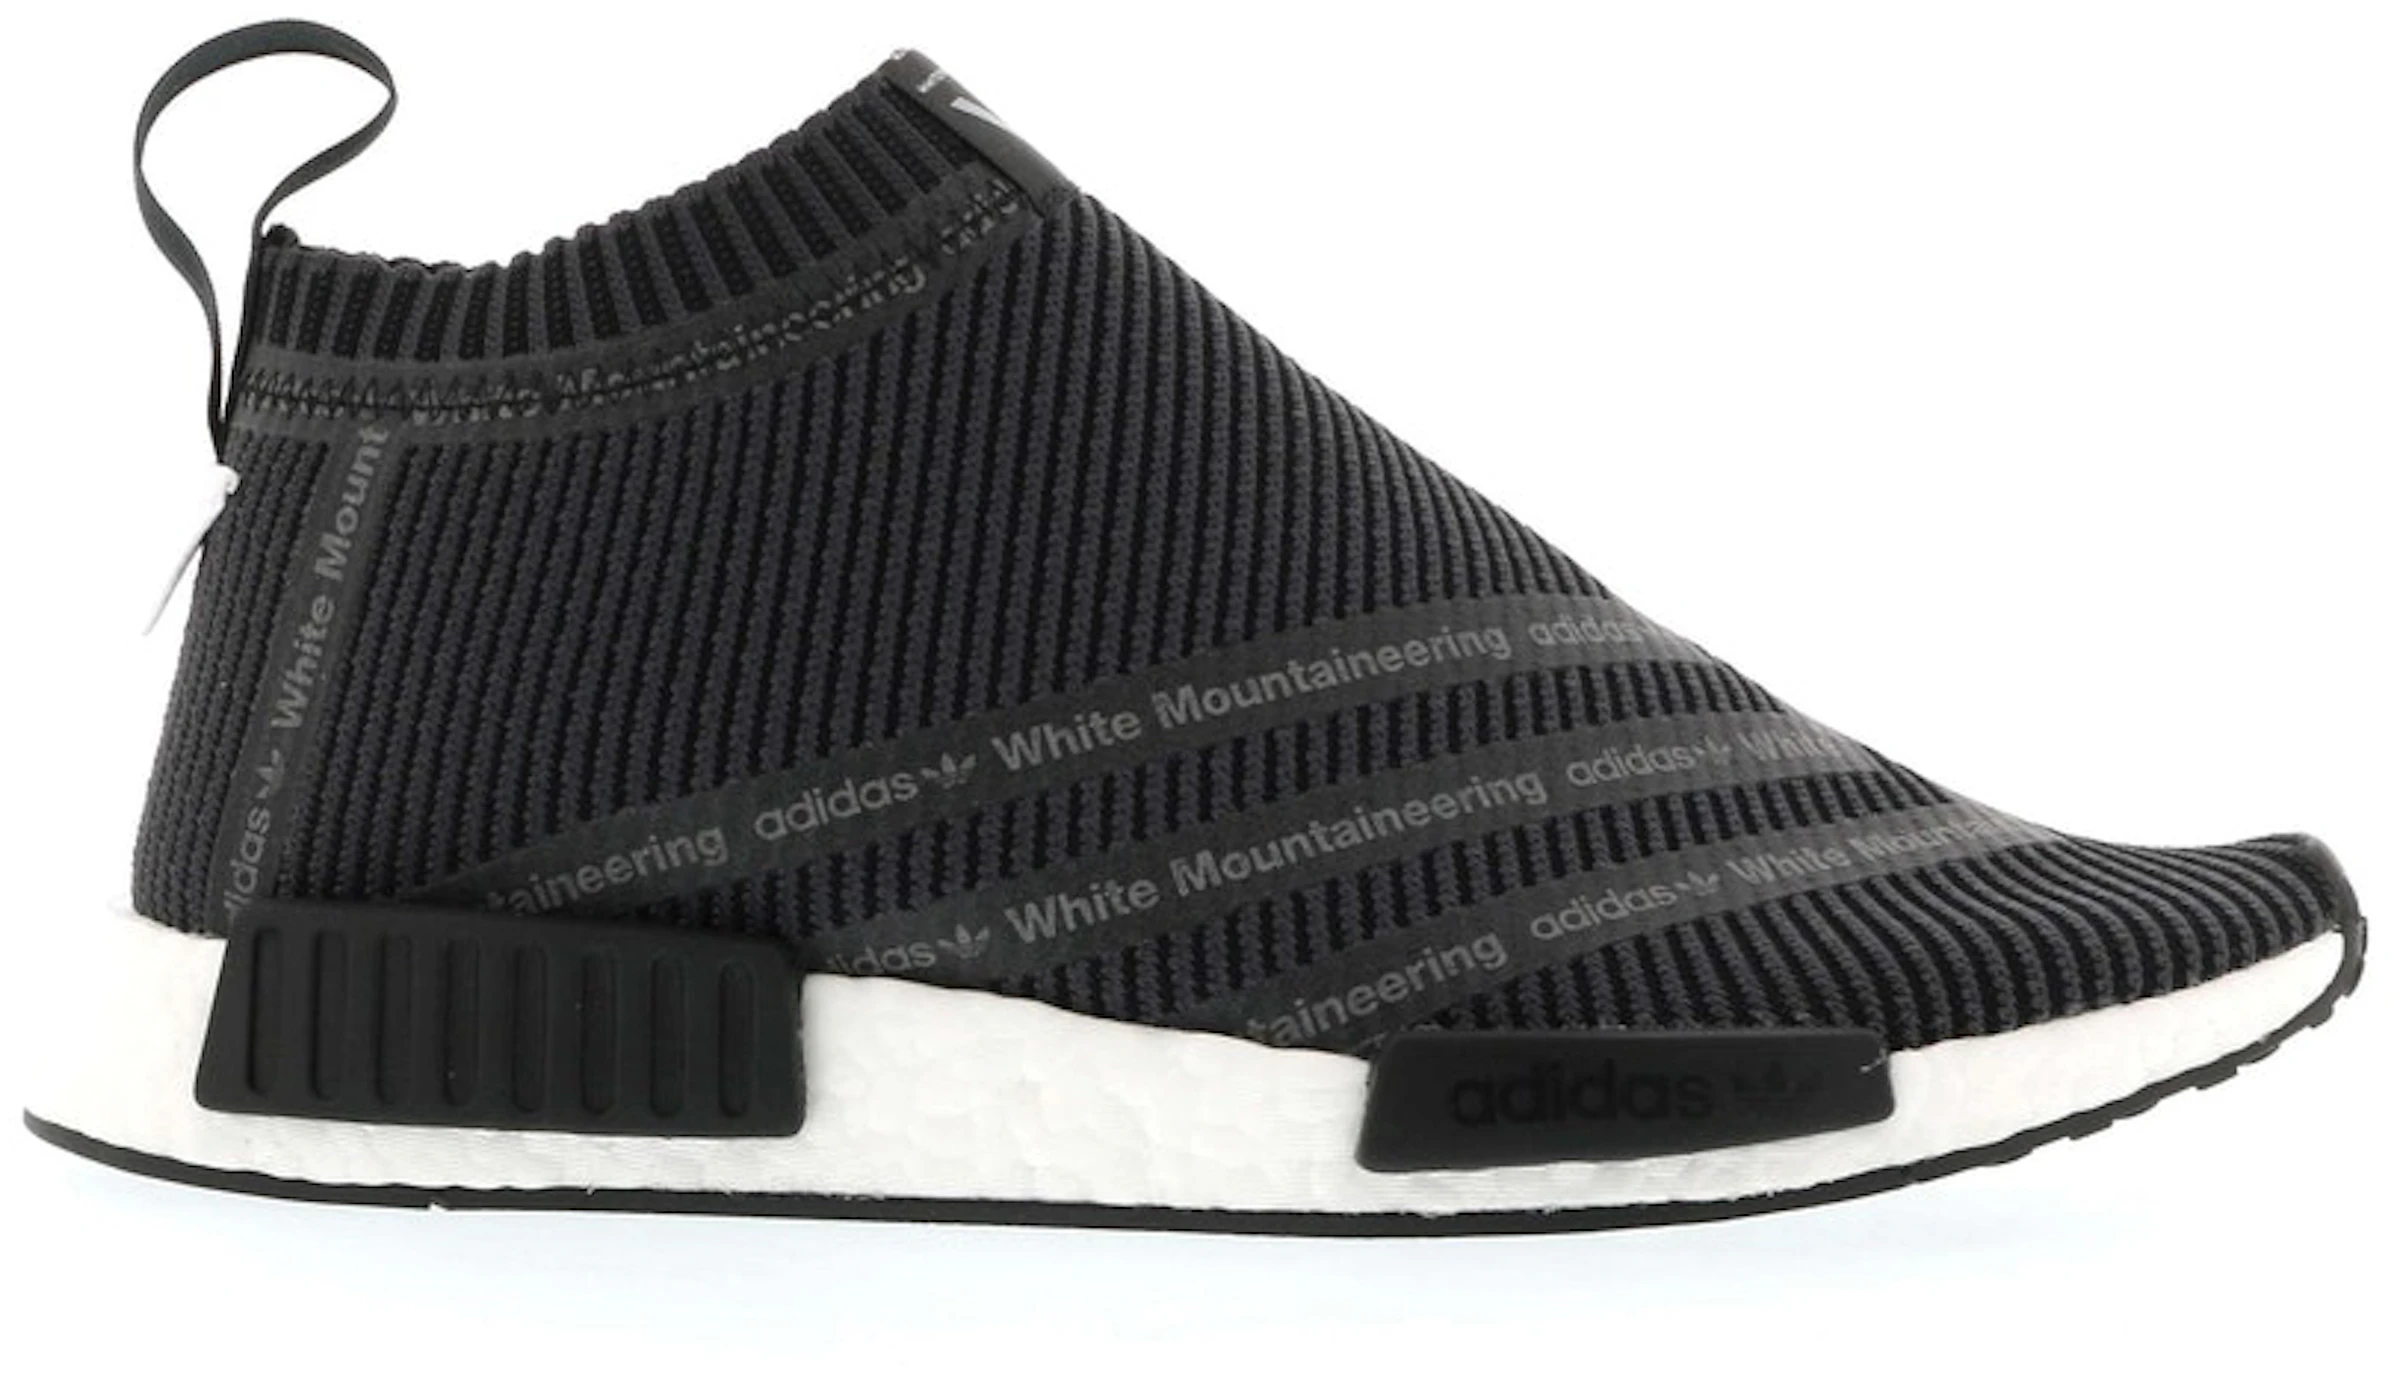 Comparable caminar Puntualidad adidas NMD City Sock White Mountaineering - S80529 - ES